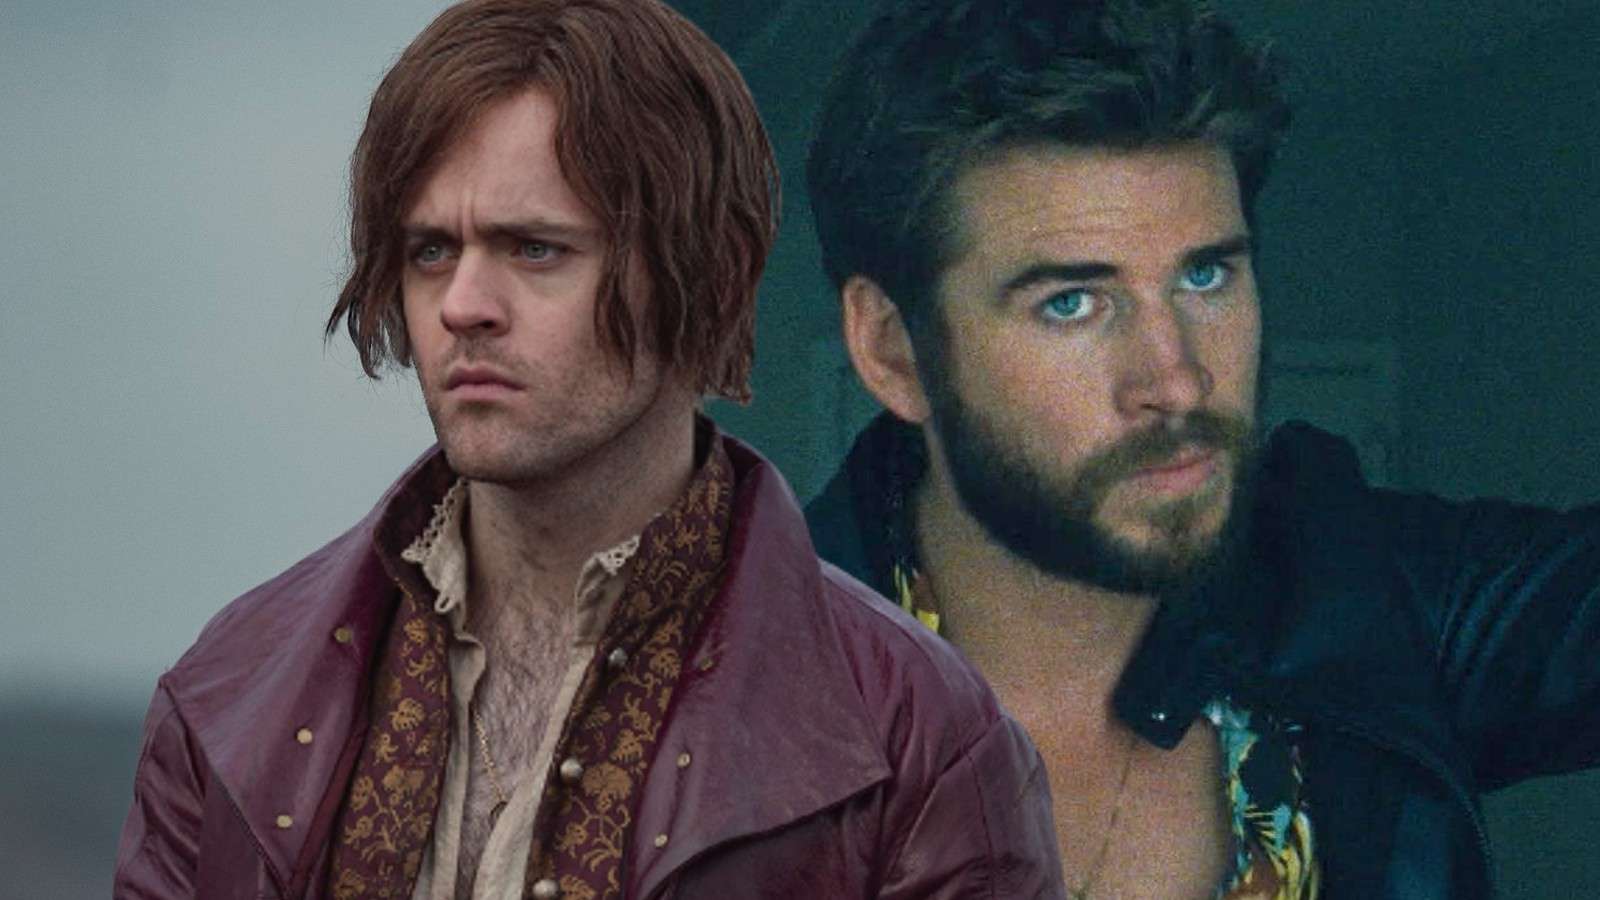 Joey Batey as Jaskier in The Witcher and Liam Hemsworth in Killerman